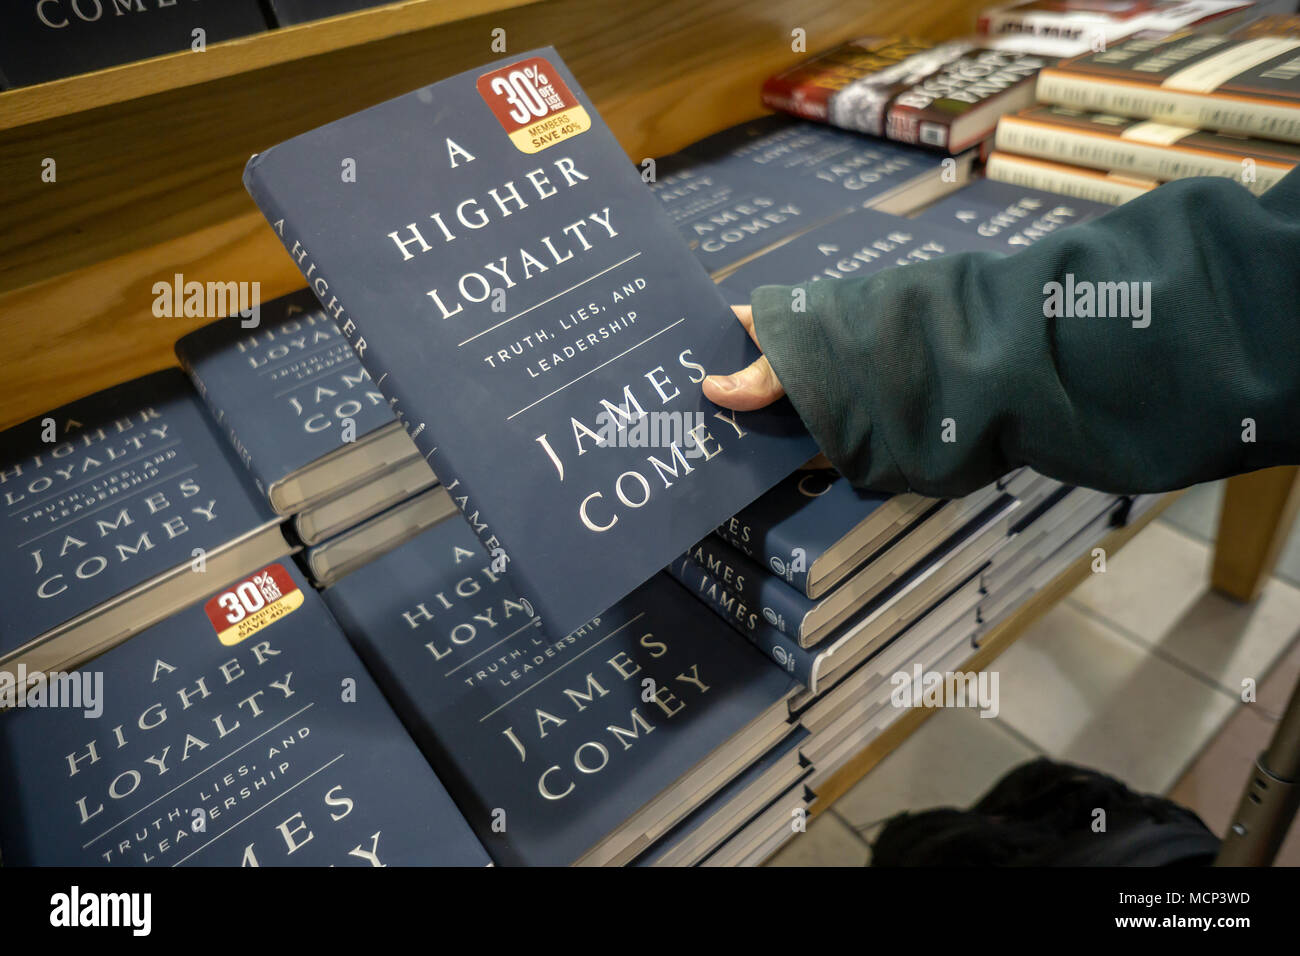 Copies of former FBI Director James Comey's book 'A Higher Loyalty: Truth, Lies, and Leadership' about President Donald Trump in a Barnes & Noble bookstore in New York on the day of its release, Tuesday, April 17, 2018. The publisher Macmillan has printed 850,000 copies of the book in anticipation of the expected demand. The first run of the last Trump book, by Michael Wolff, 'Fire and Fury', also published by Macmillan, was initially only 150,000 copies. (© Richard B. Levine) Stock Photo